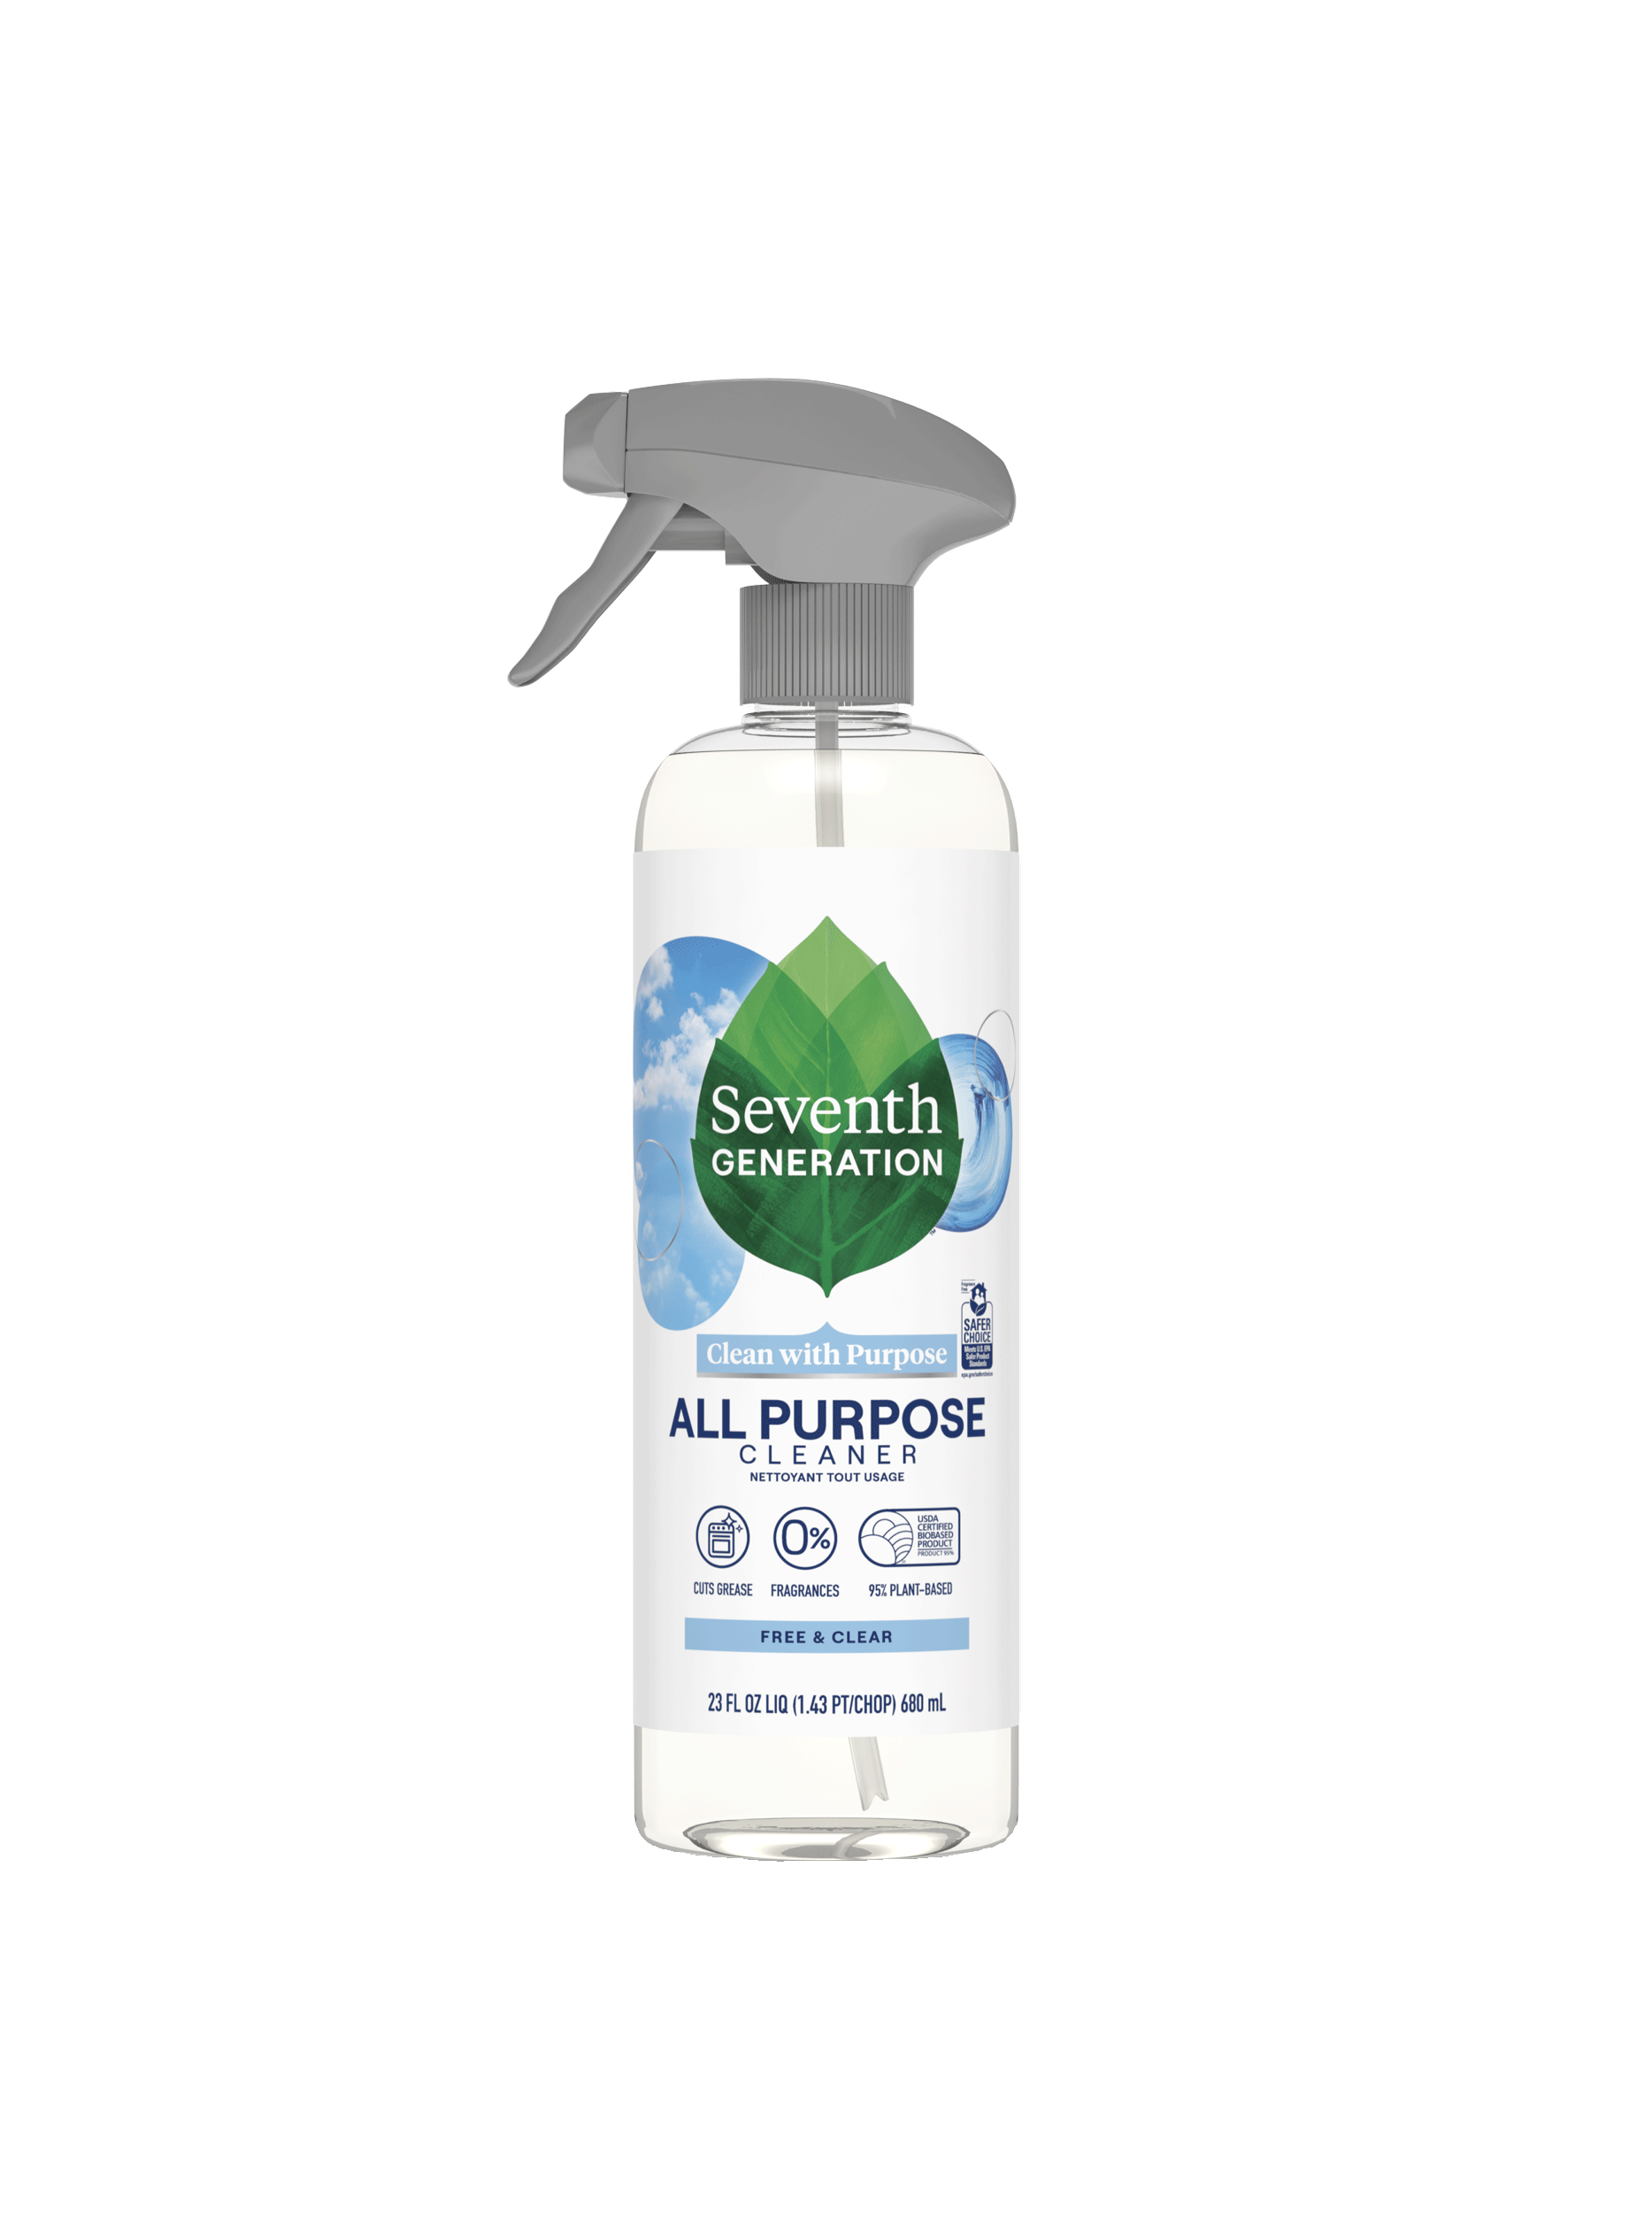 Hope's Perfect Glass Multi-Surface Cleaner, 32oz Bottle